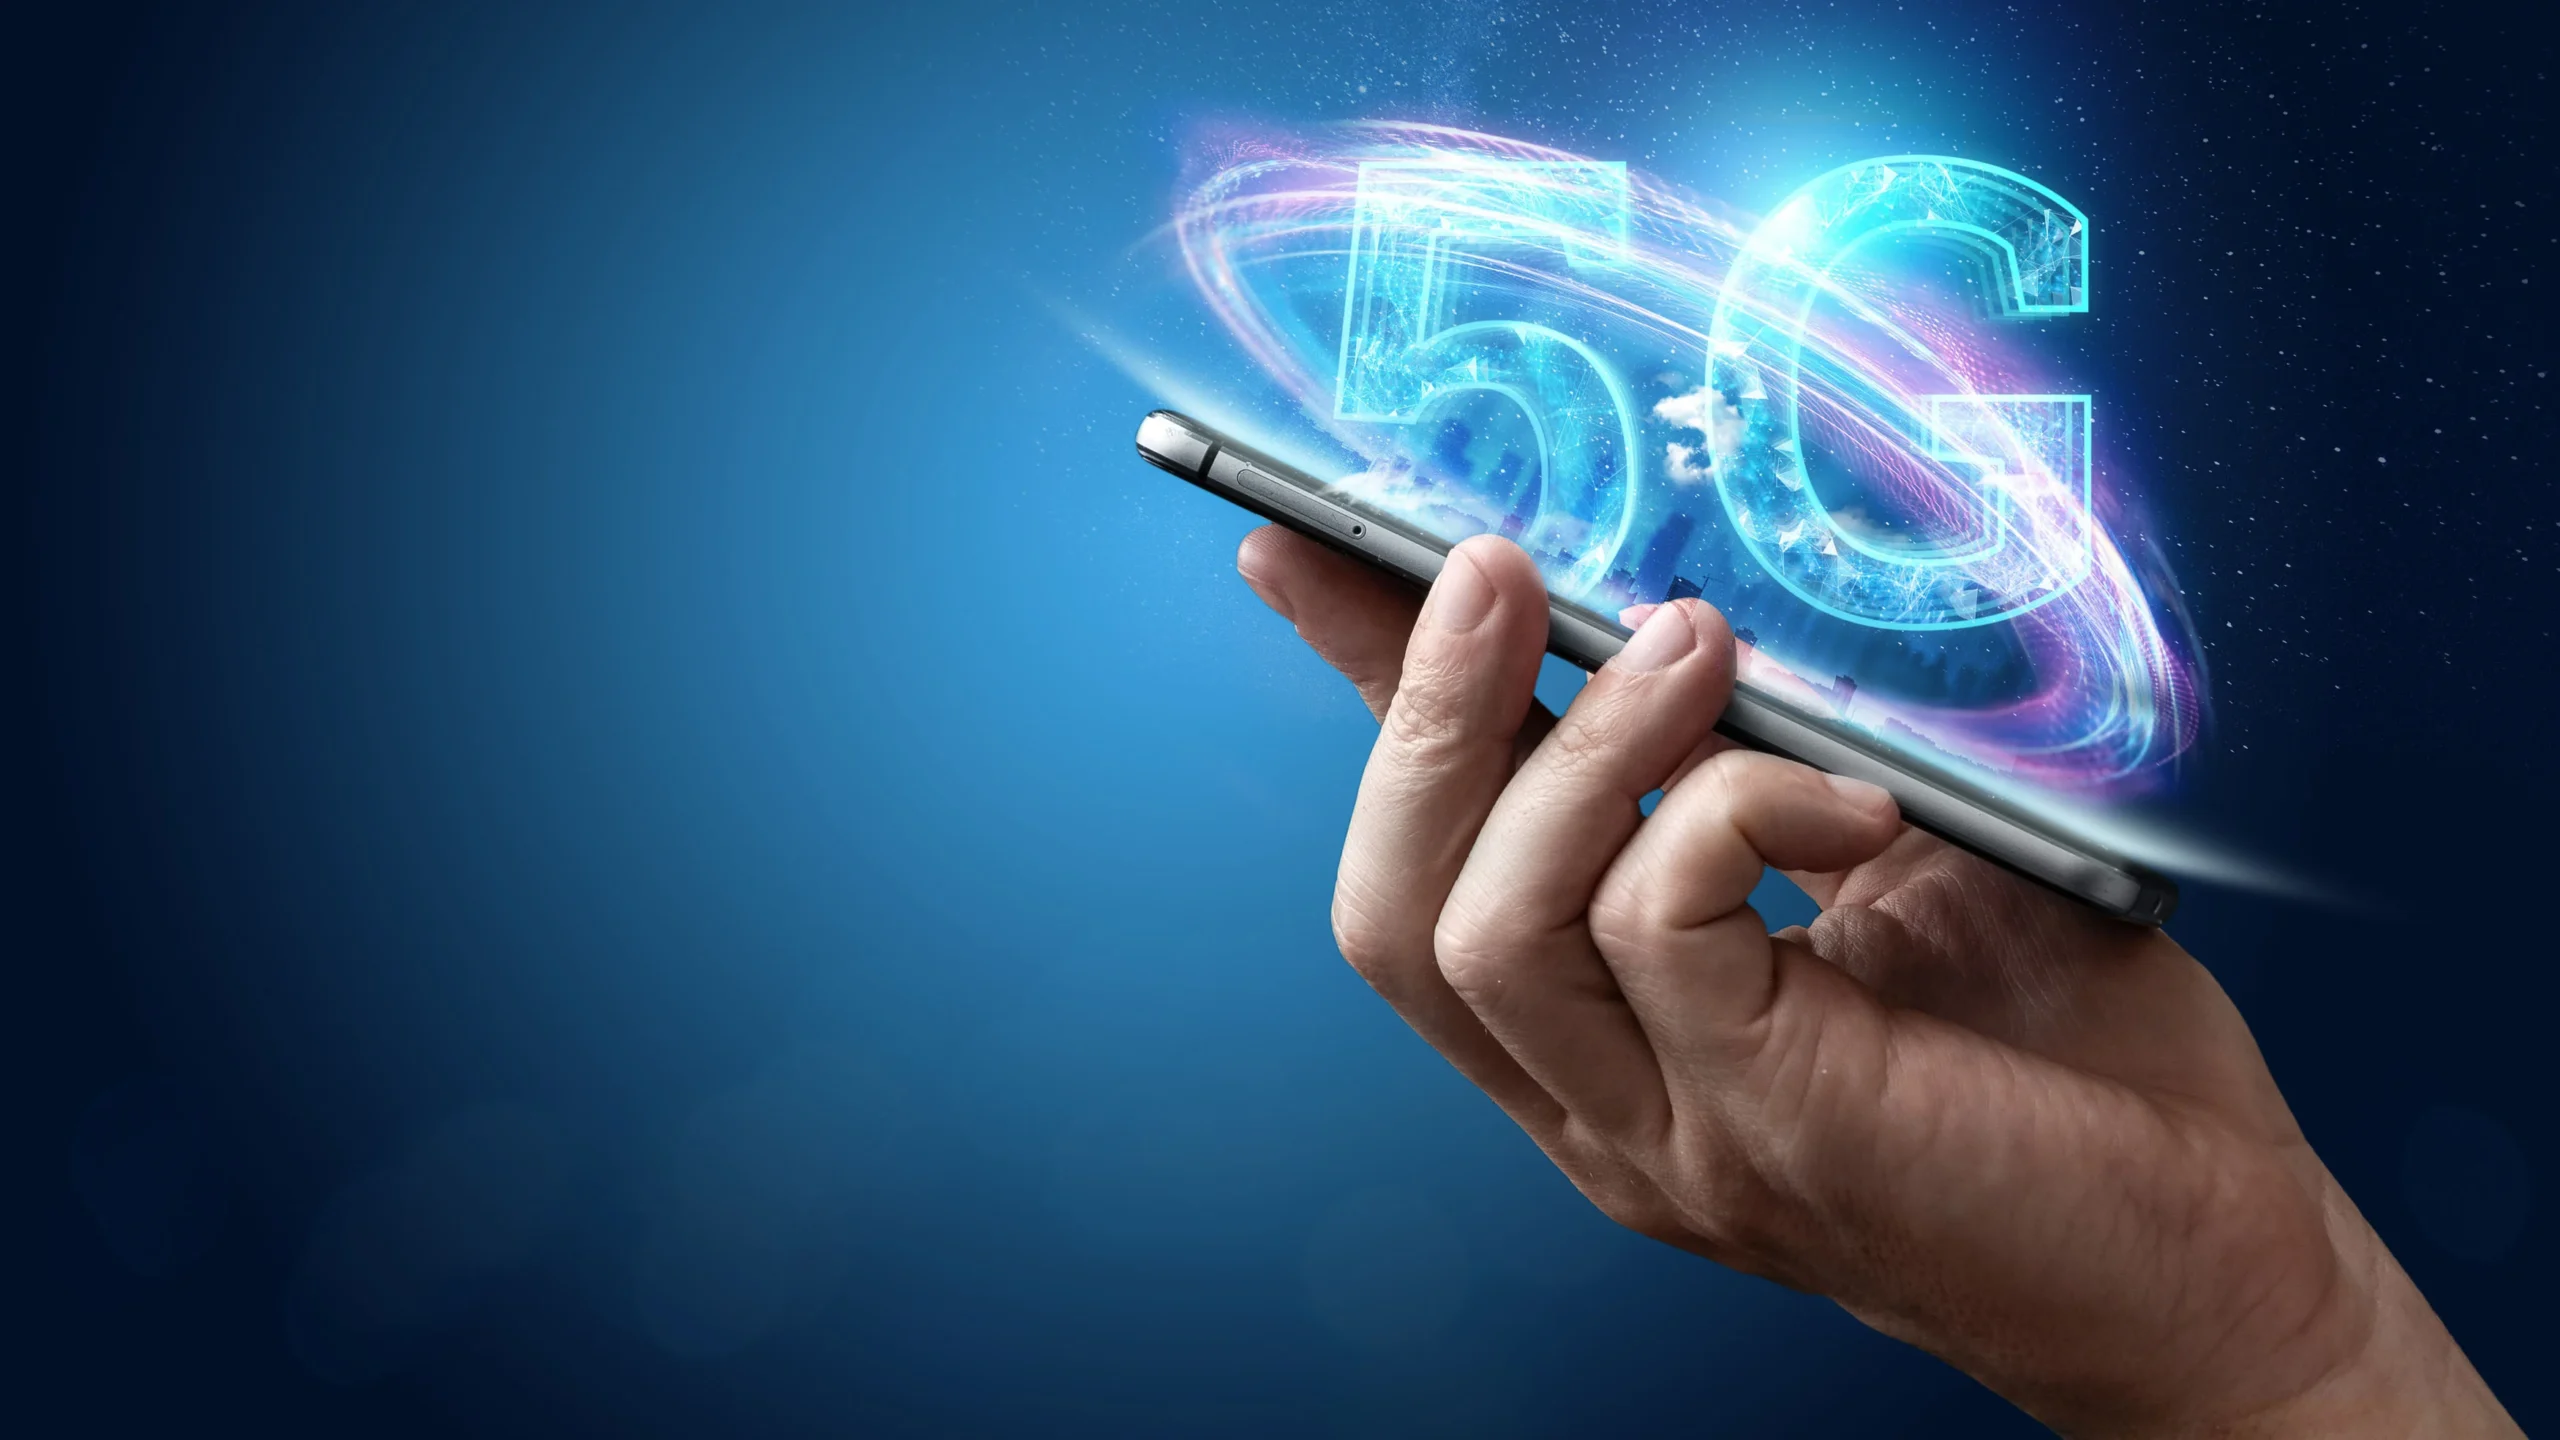 Pakistan launches first phase of 5G